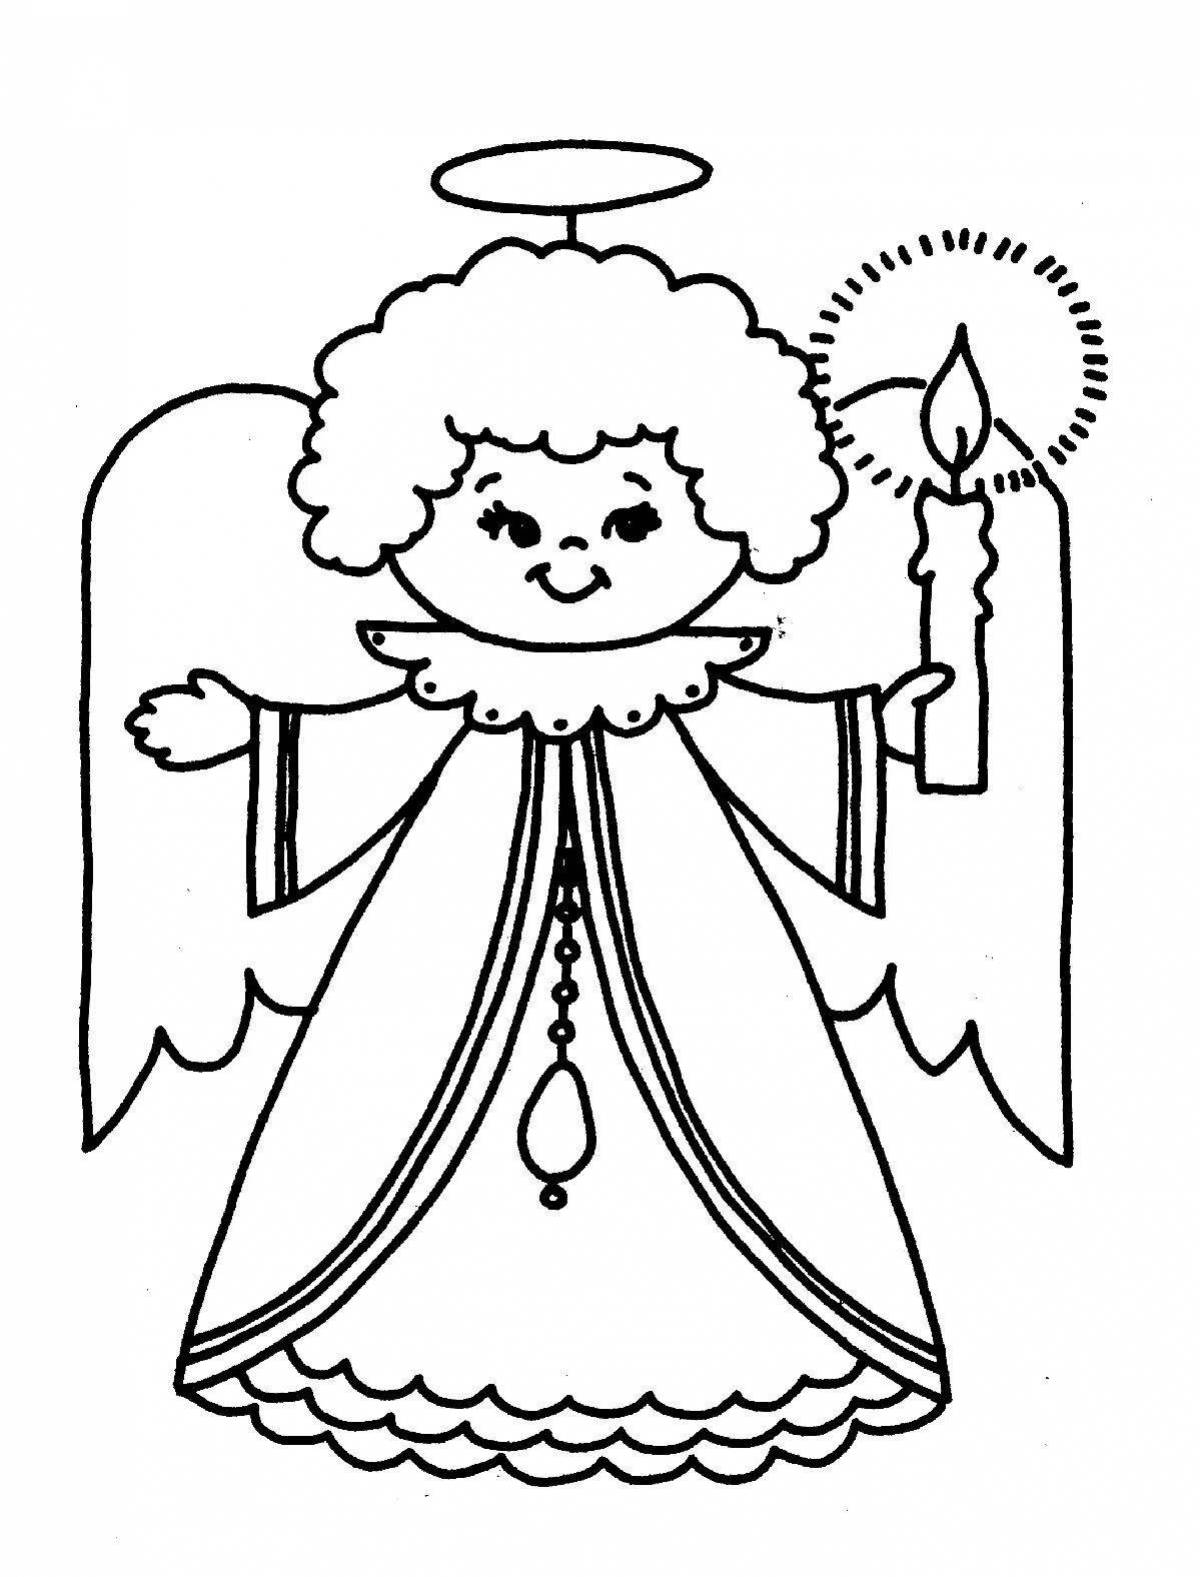 Gorgeous Christmas angel coloring book for kids